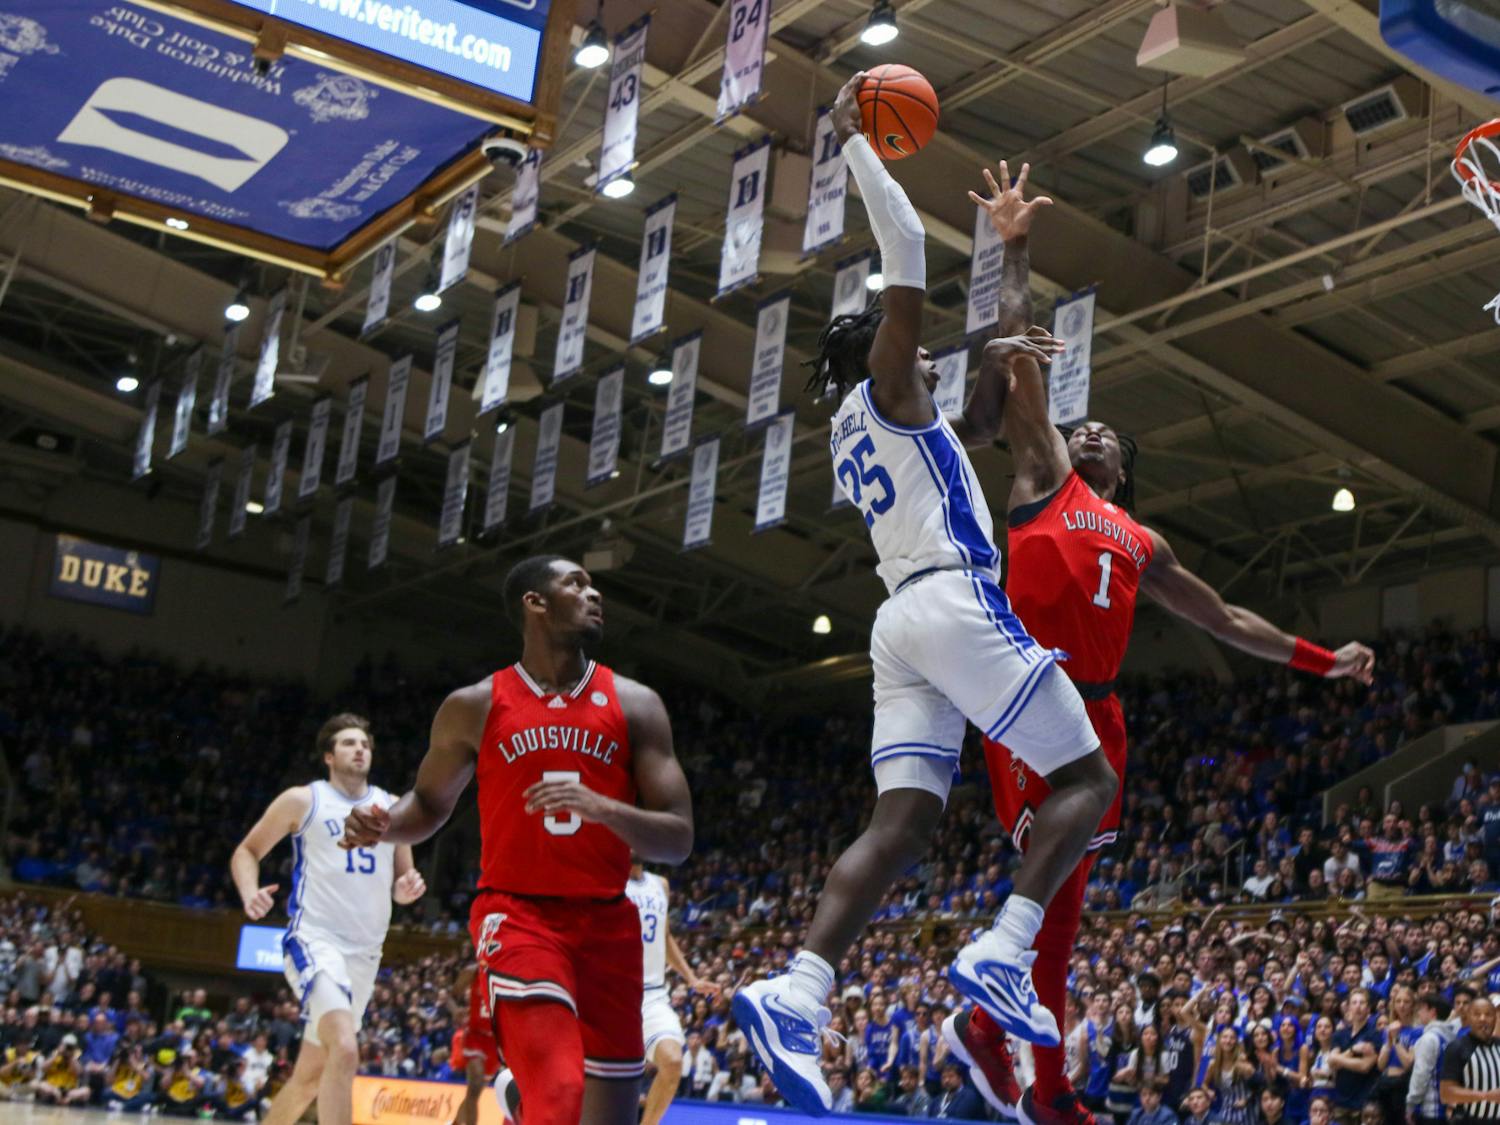 Mark Mitchell skies for the dunk during Duke's Feb. 20 win against Louisville at Cameron Indoor Stadium.